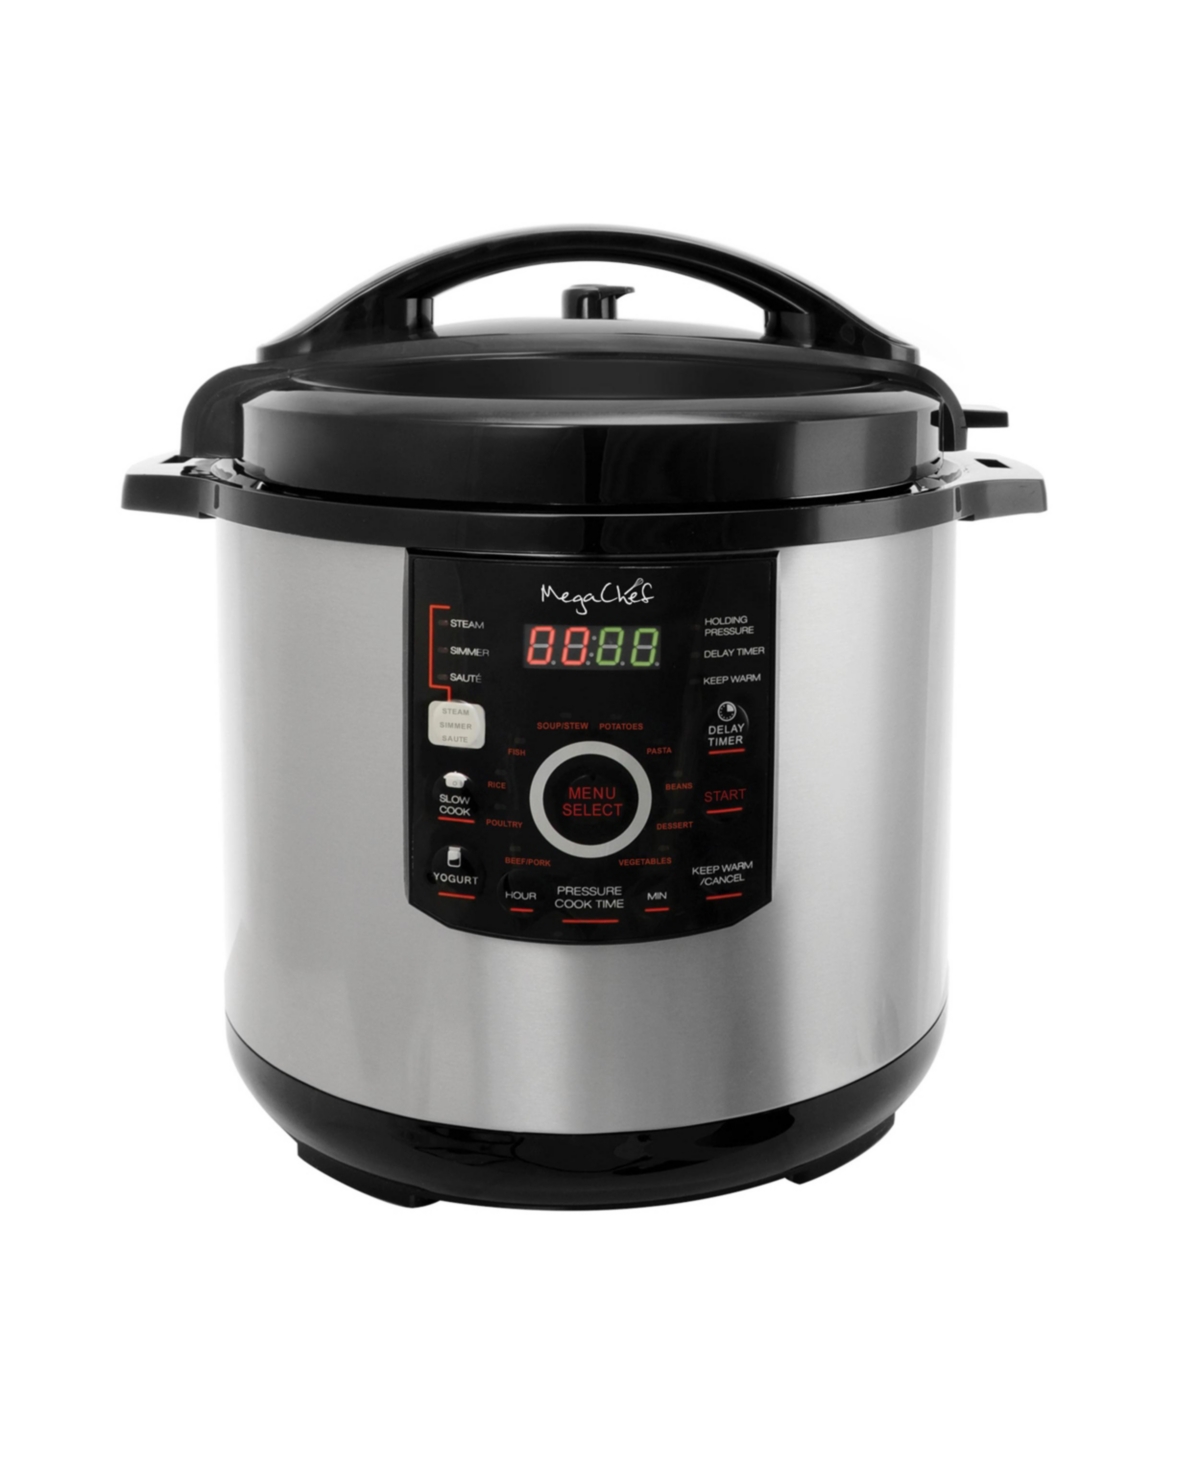 MEGACHEF 12 QT. STEEL DIGITAL PRESSURE COOKER WITH 15 PRESETS AND GLASS LID